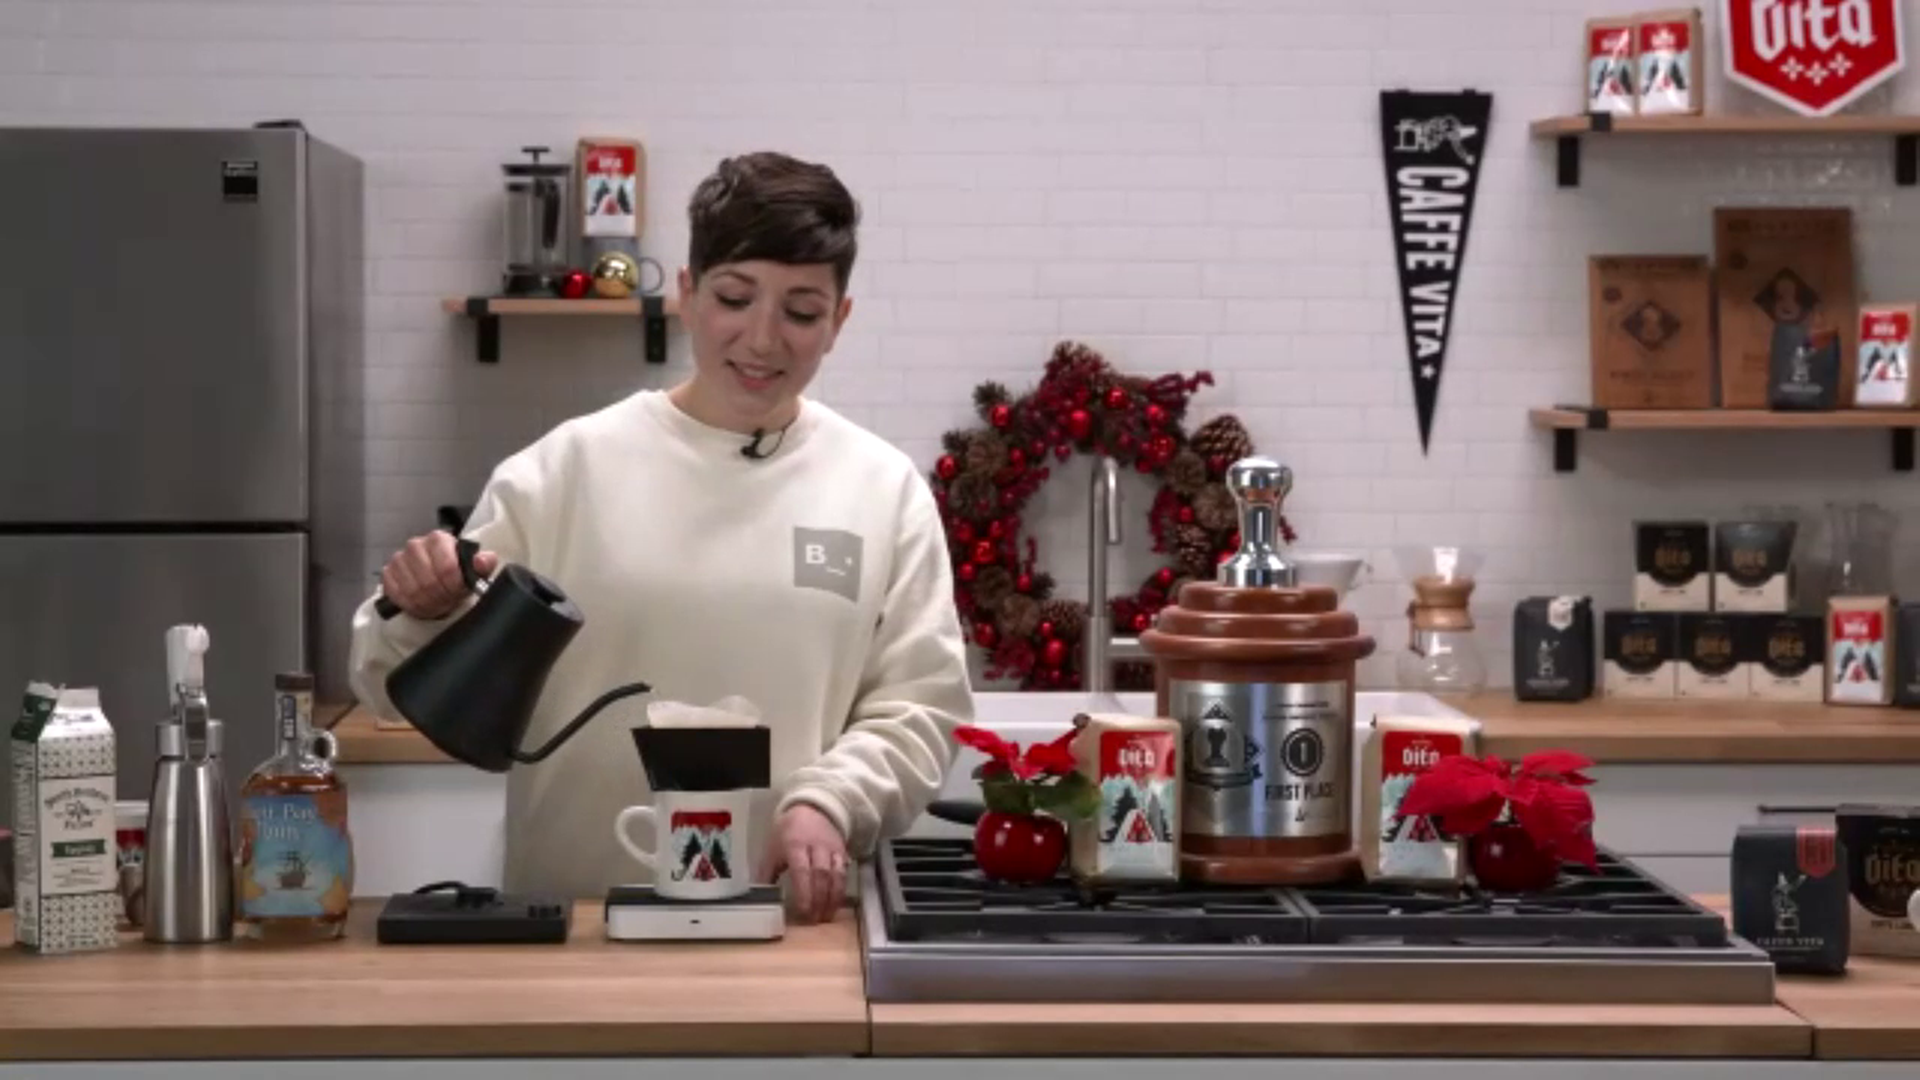 We learn from the pros! The 2019 U.S. Barista Champion shows us how to achieve a great pour-over.